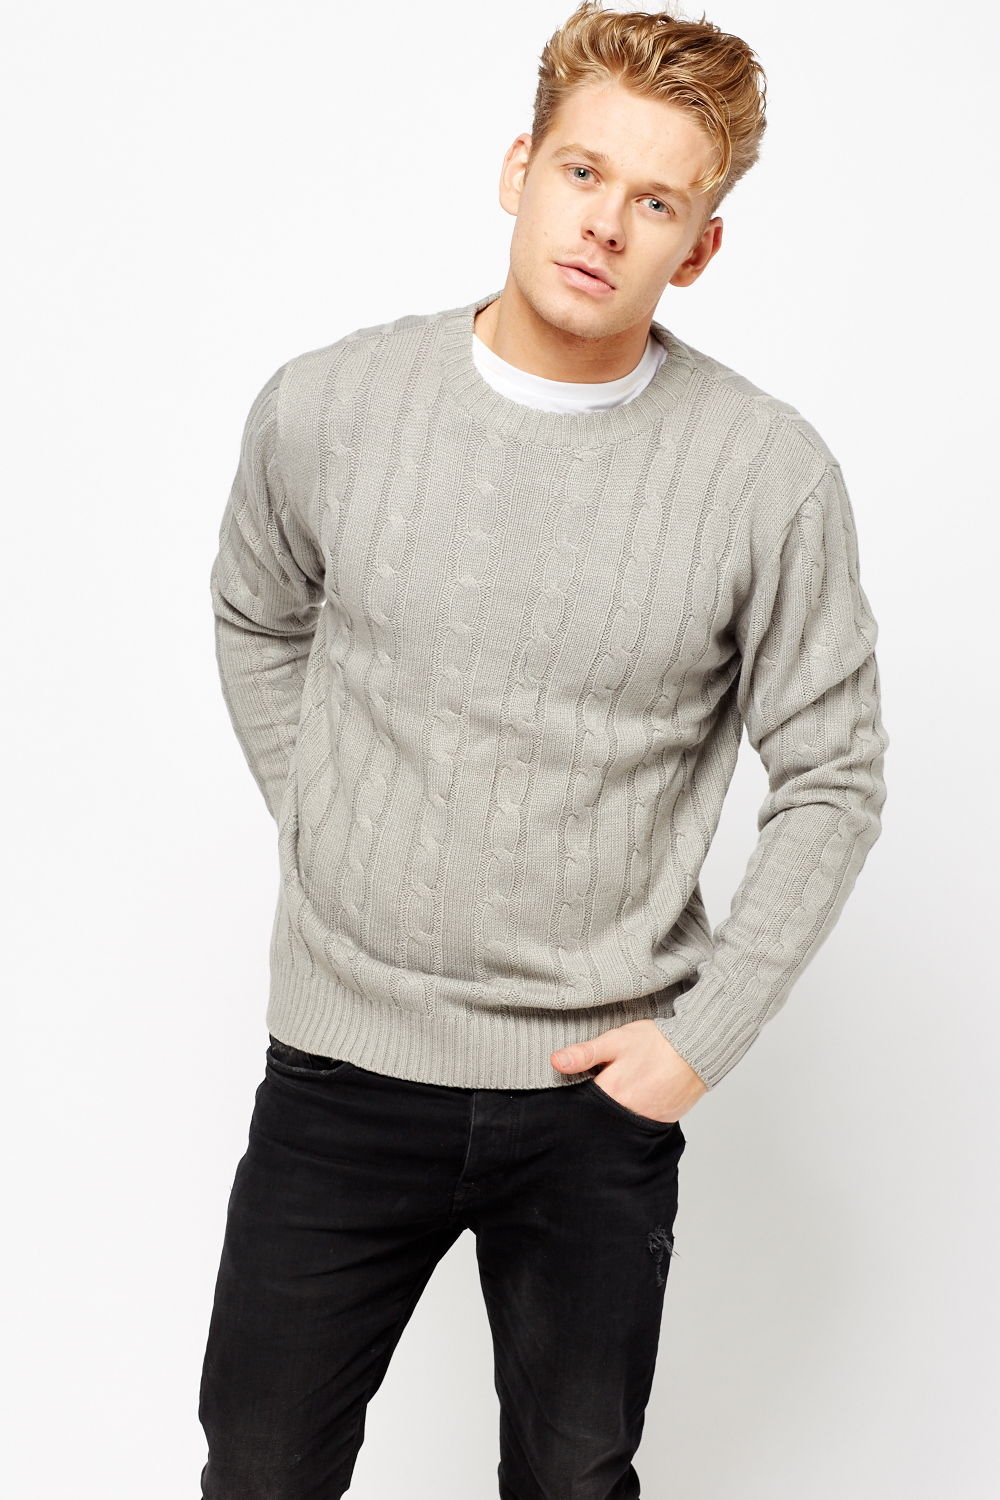 Cable Knit Ribbed Mens Jumper - Just $7